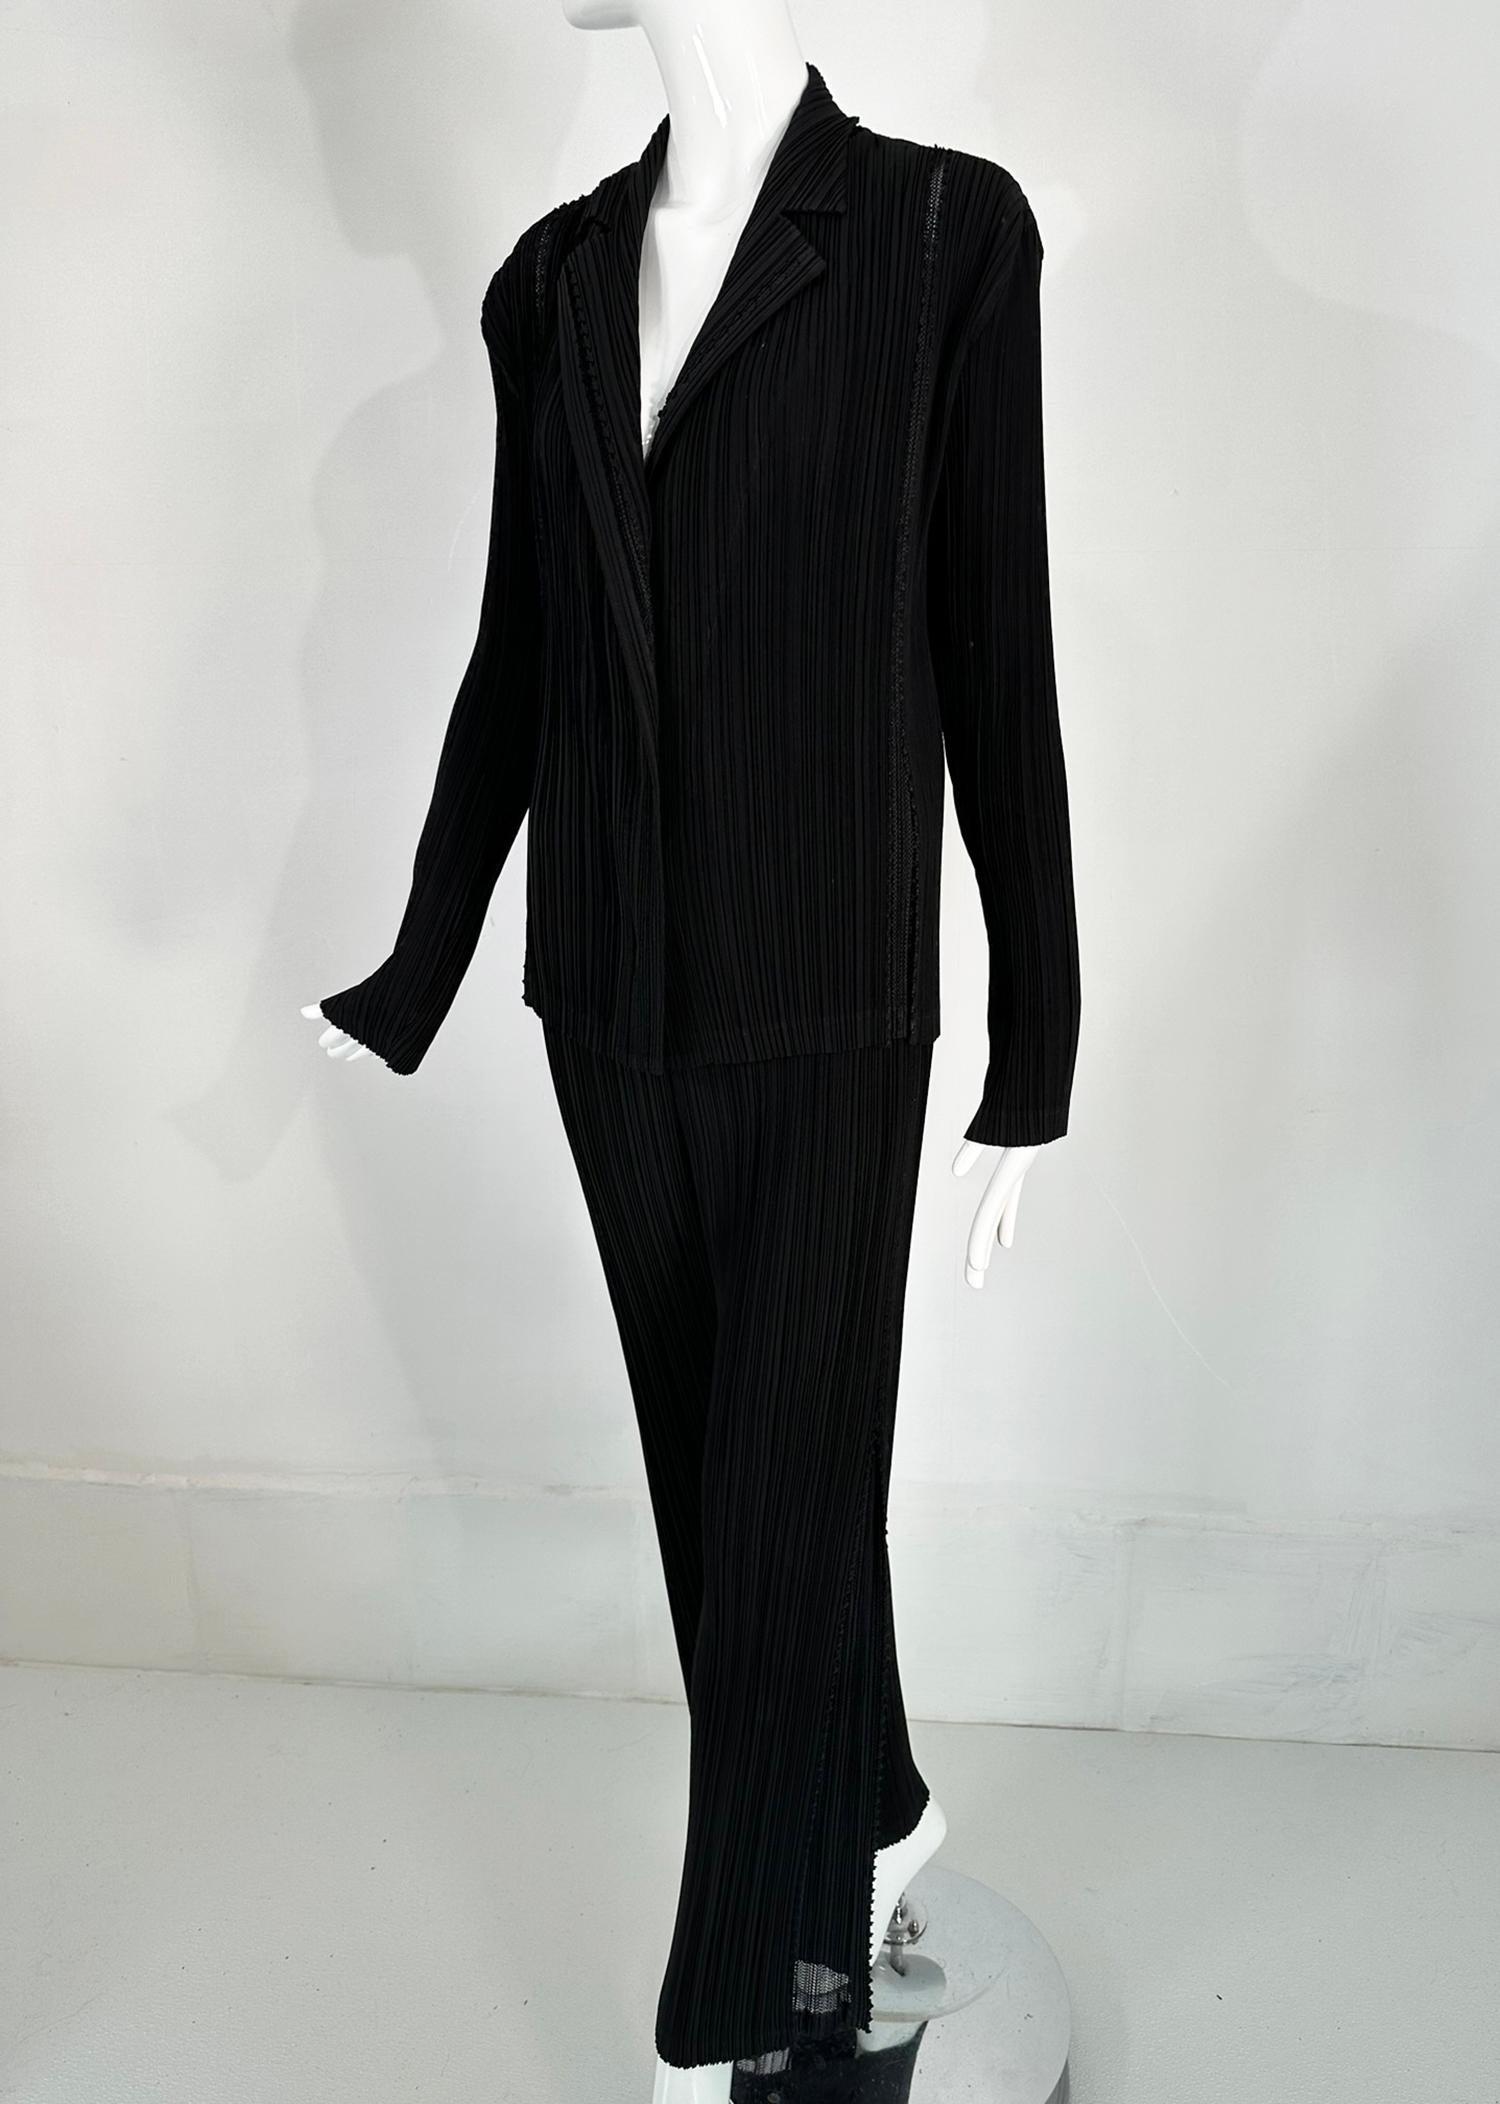 Issey Miyake Fete 2pc Jacket & Pant Black Pleats with Open Mesh Insertion Size 4 For Sale 7